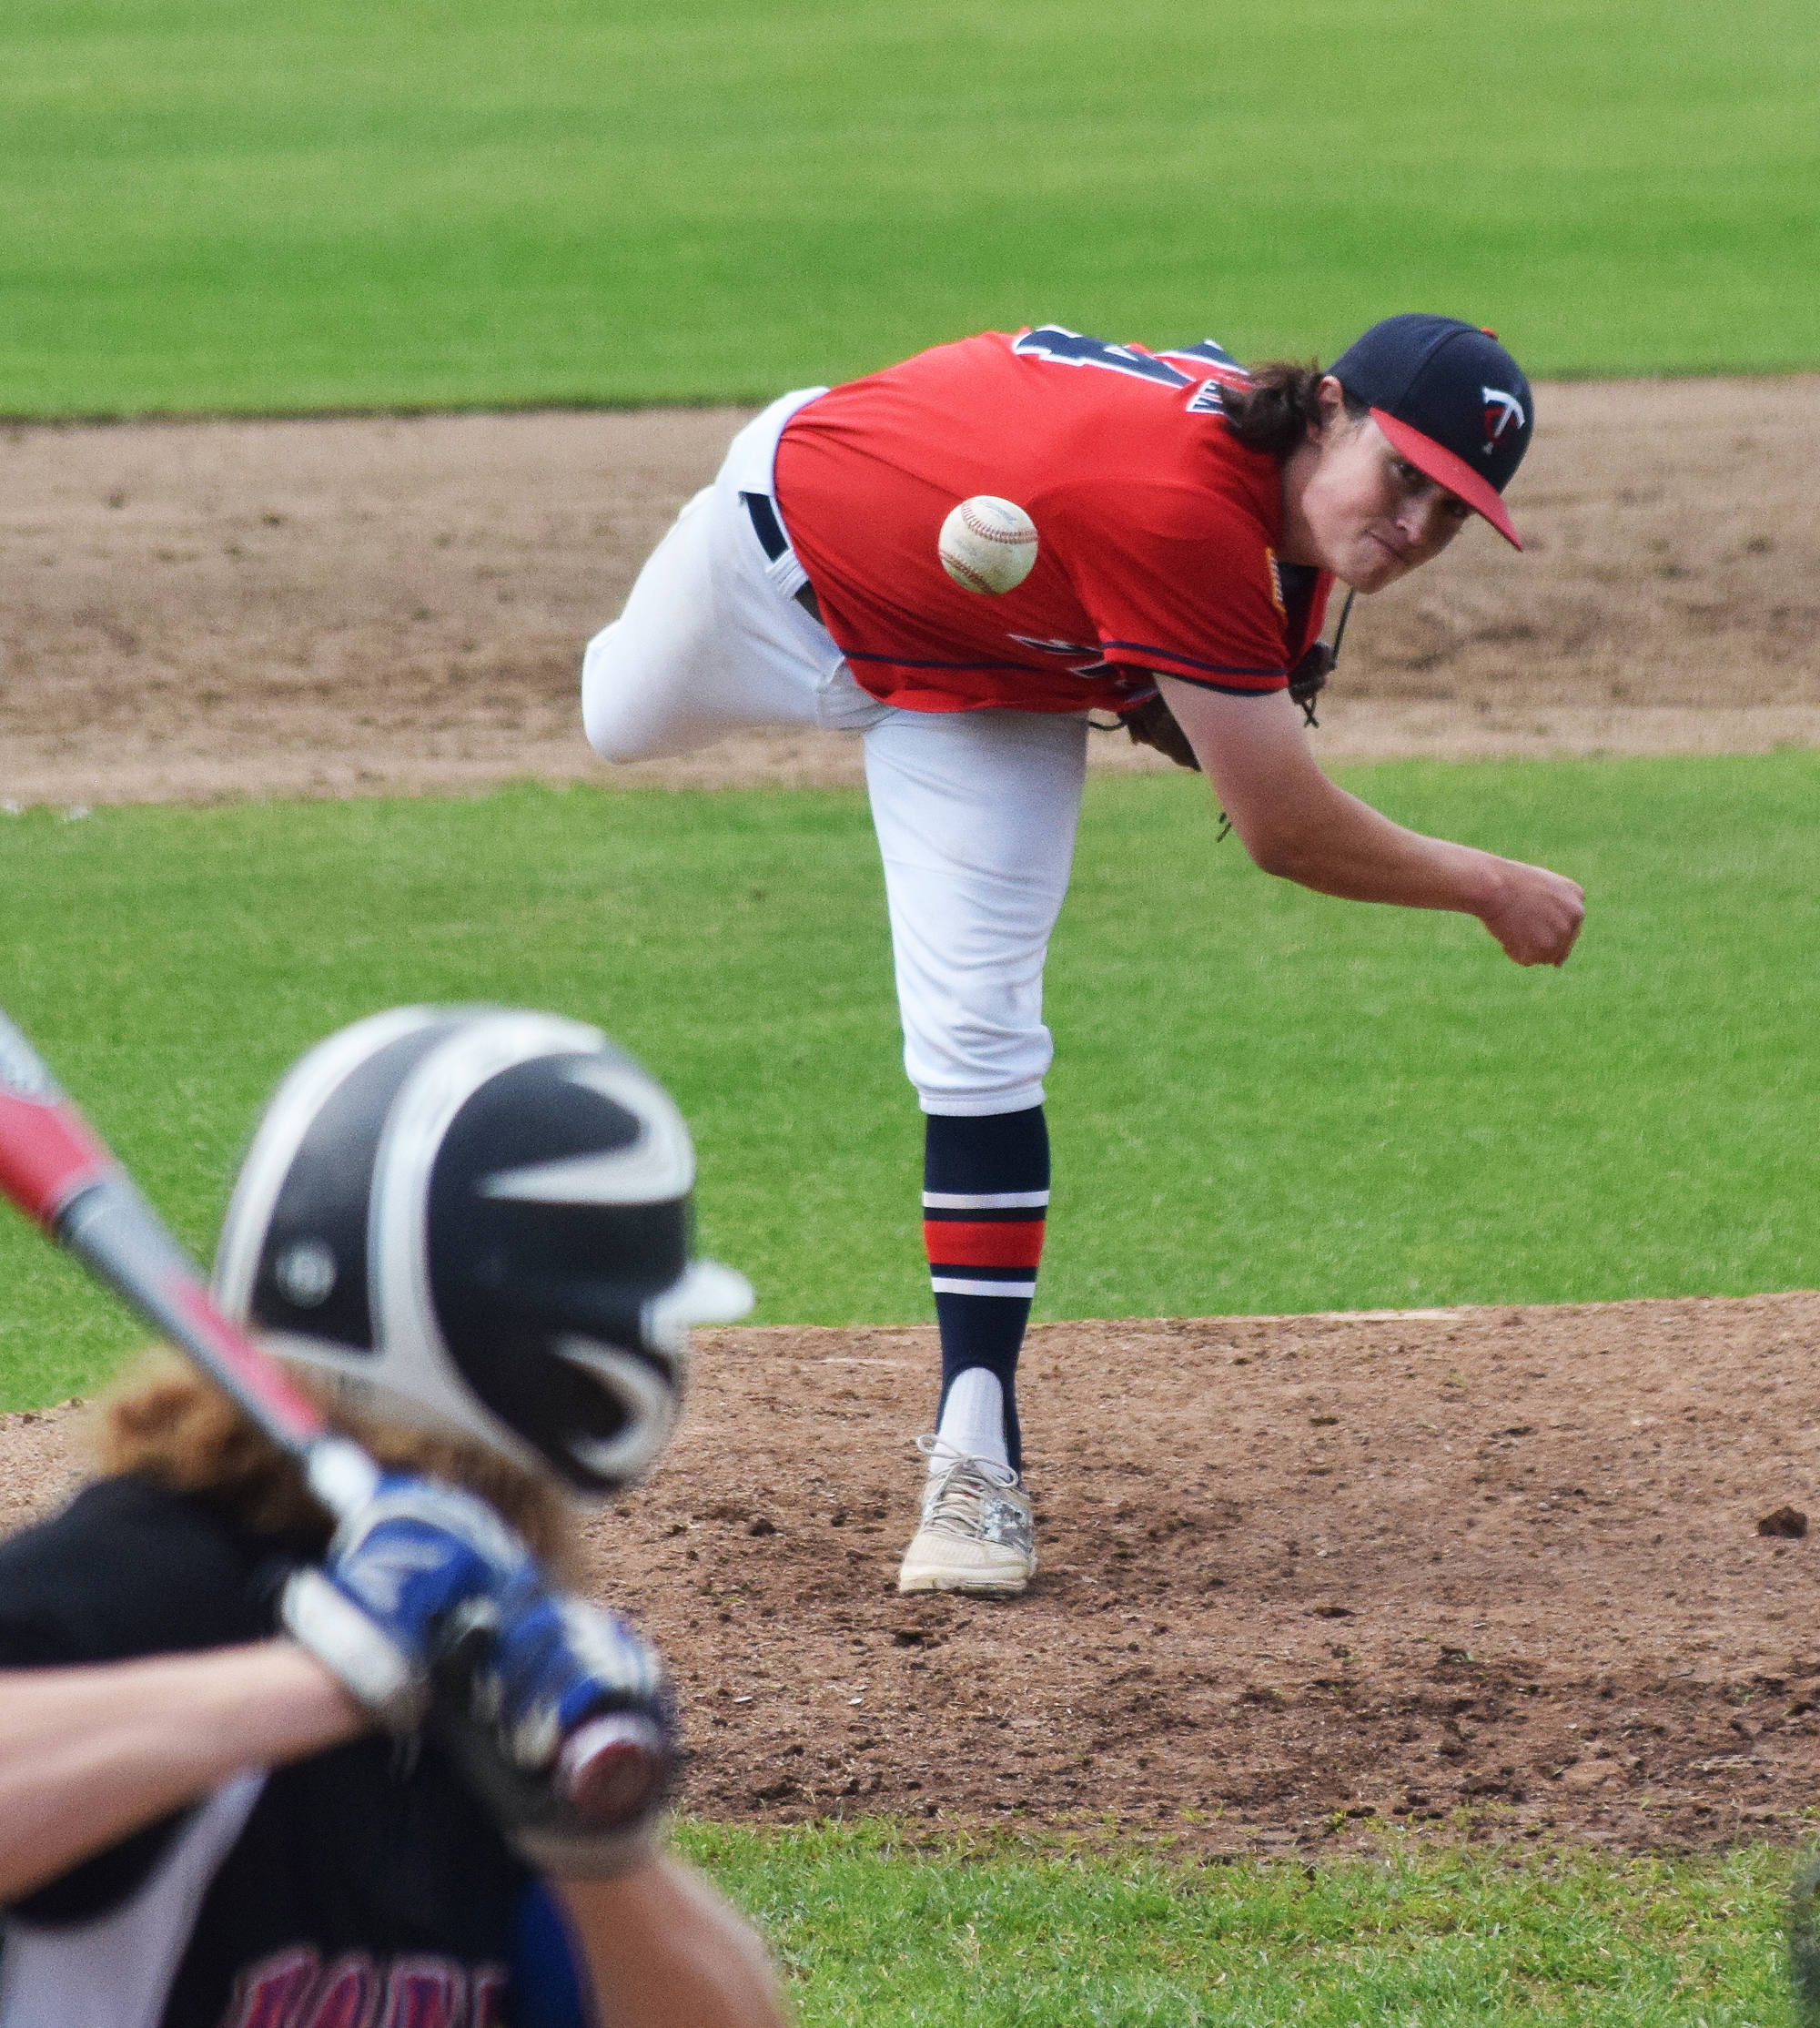 Post 20 Twins pitcher Calvin Hills delivers a pitch to a Palmer batter Sunday at Coral Seymour Memorial Ballpark in Kenai. (Photo by Joey Klecka/Peninsula Clarion)